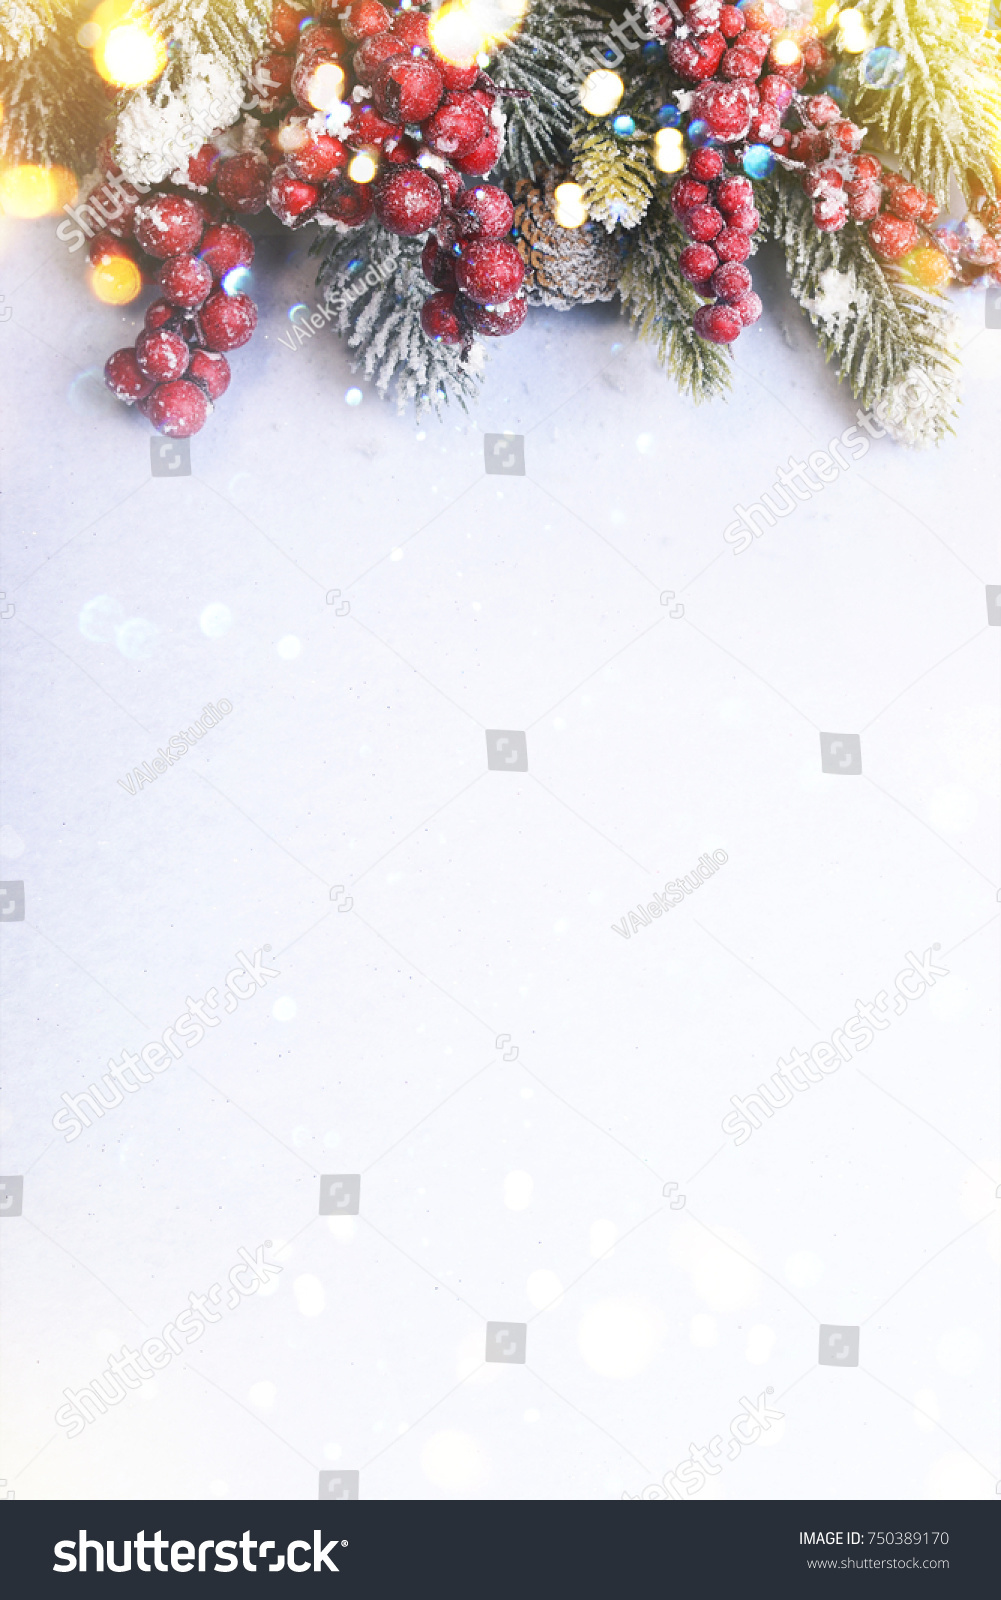 Christmas and New Year holidays background #750389170